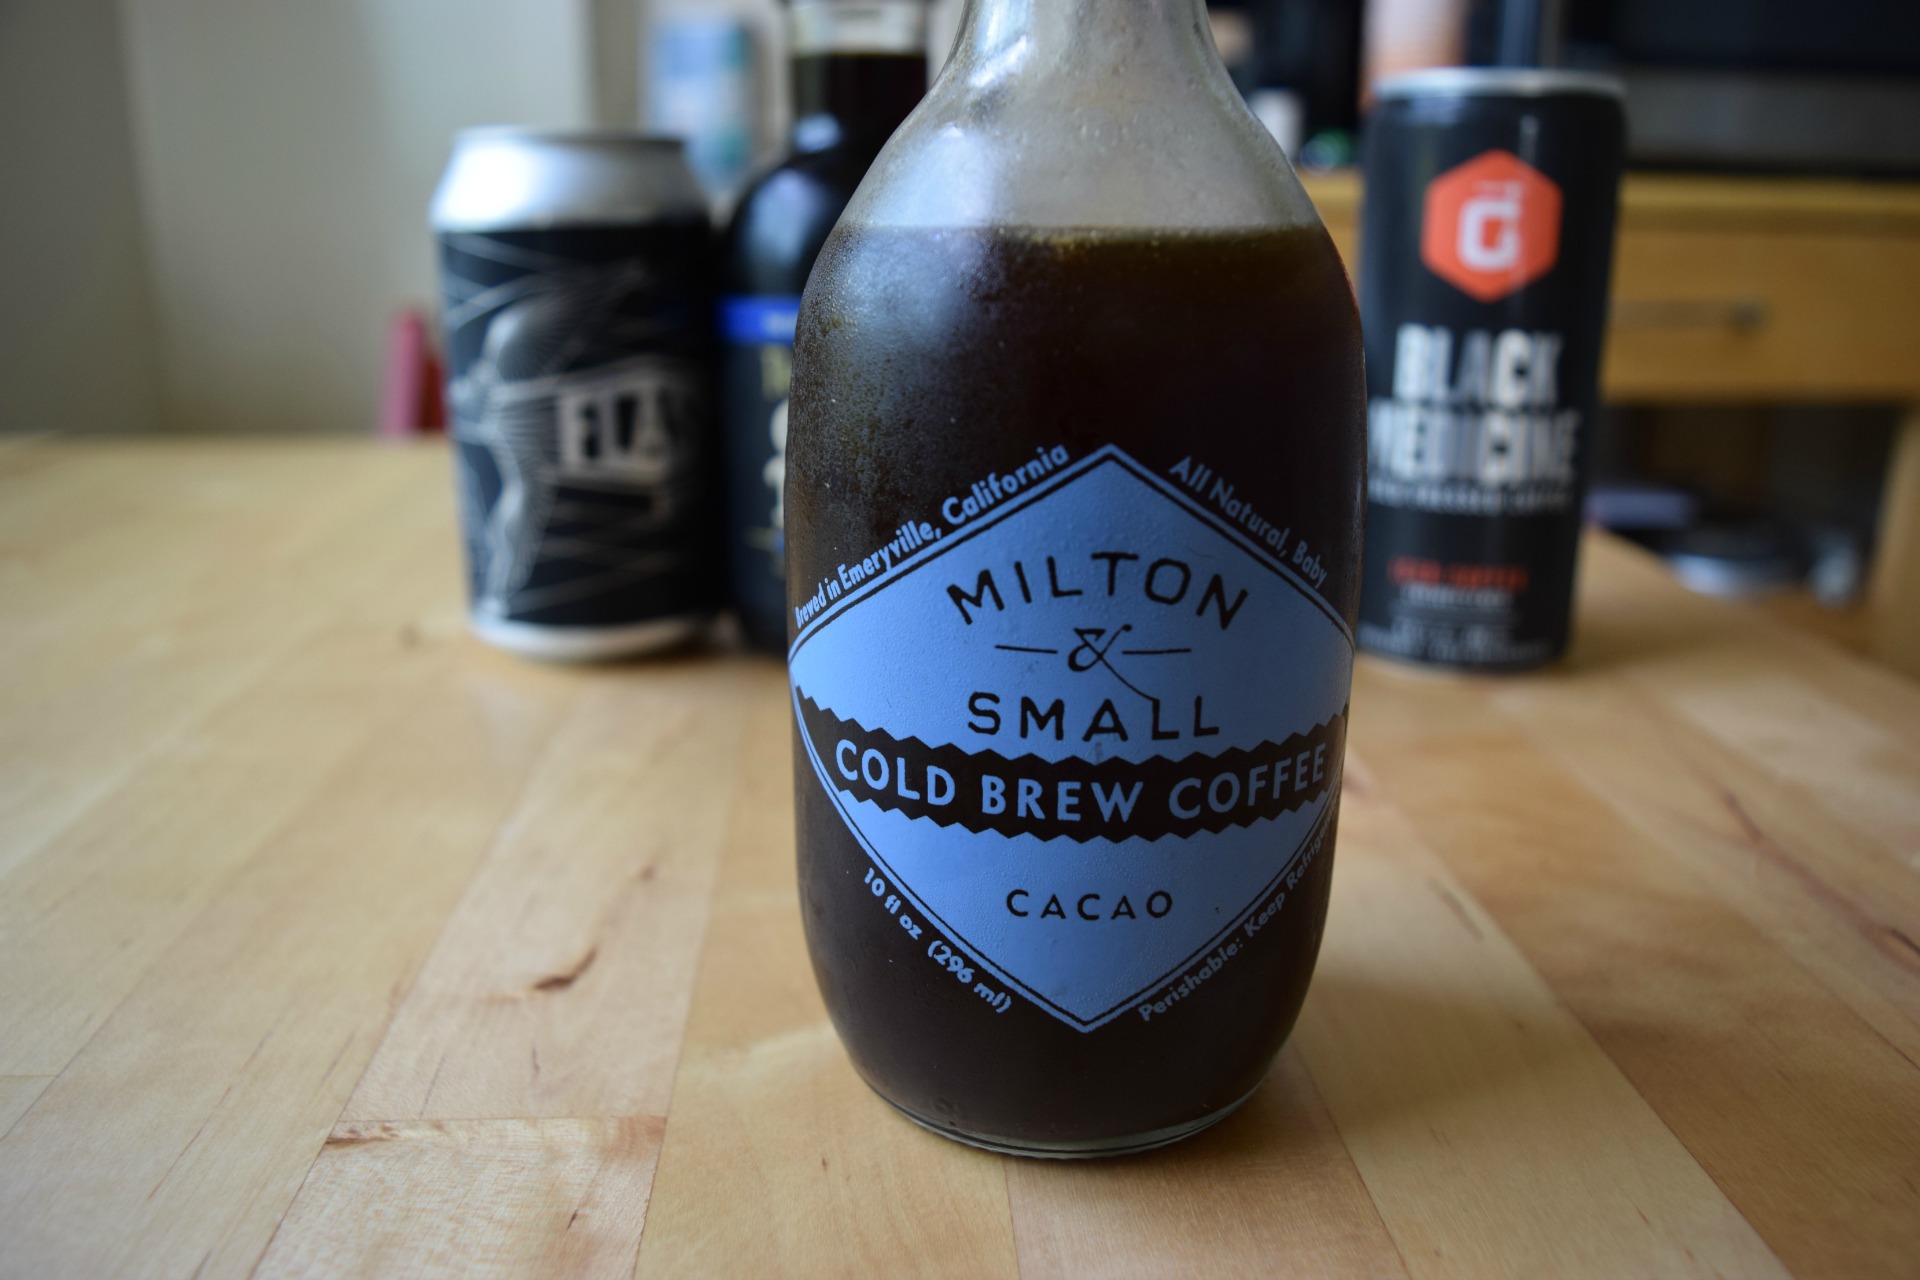 Cold brew with cacao nibs from Emeryville's Milton & Small.